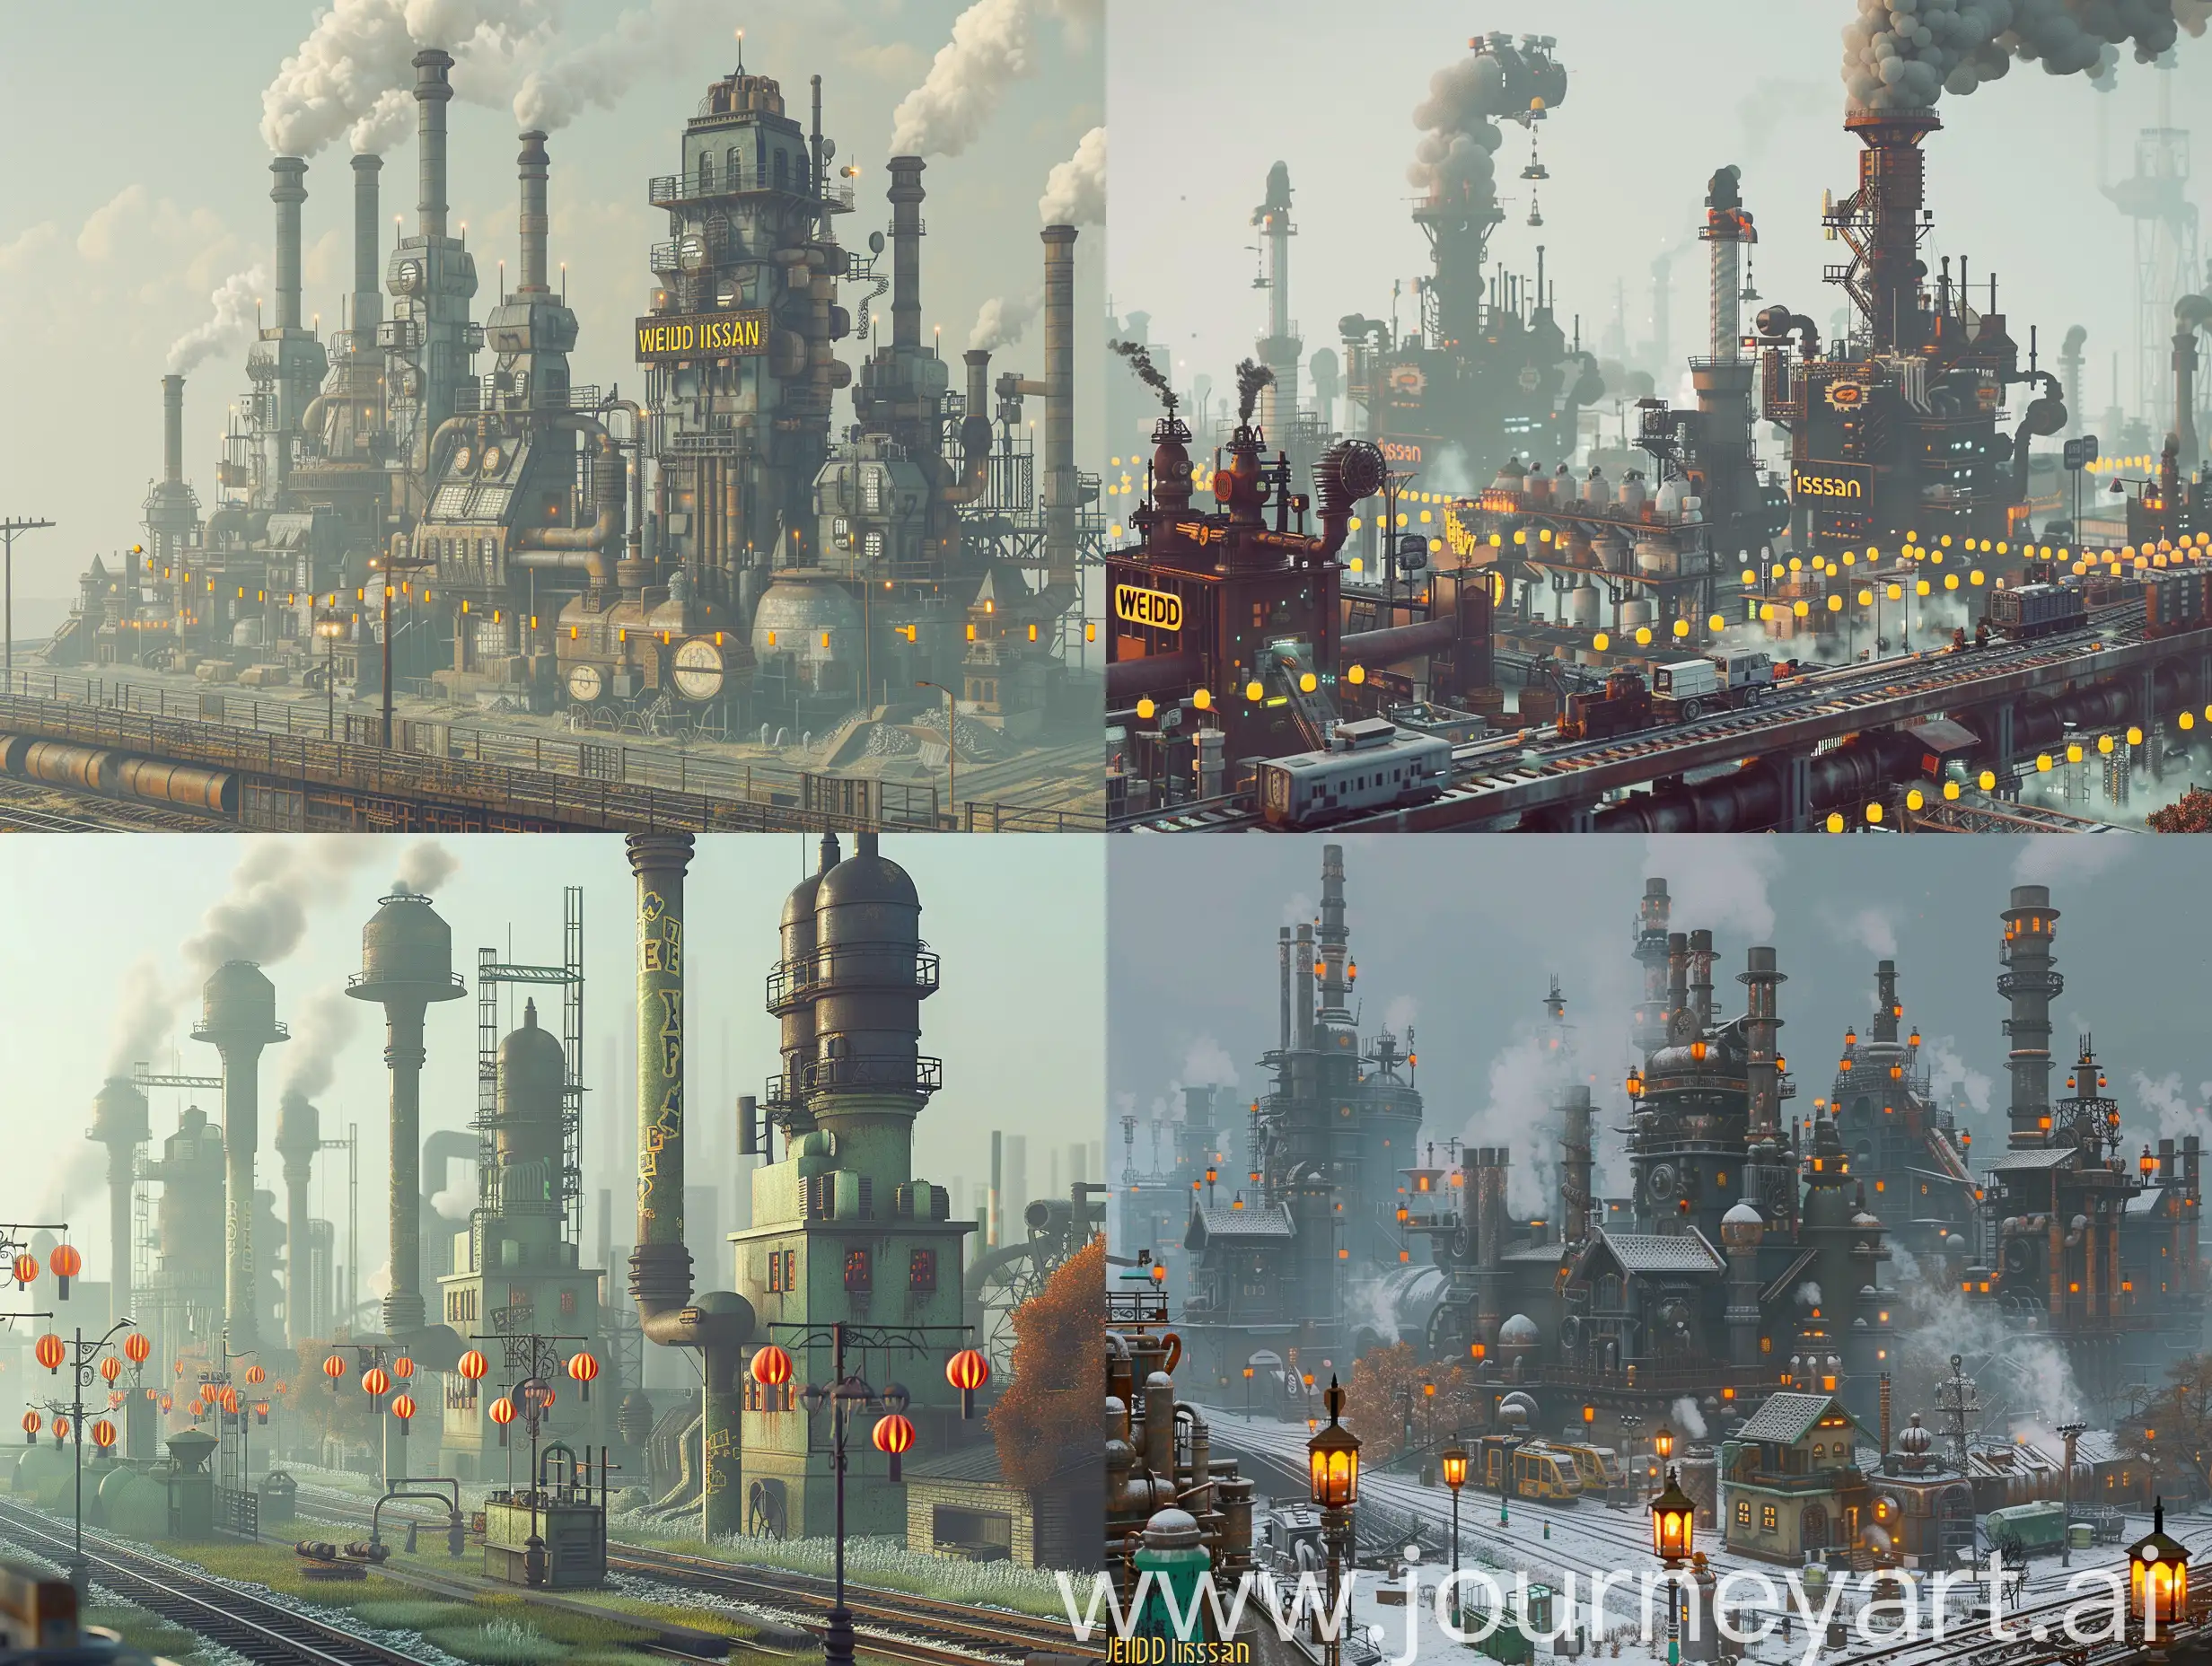 Futuristic-Cityscape-with-Weird-Insaan-Title-Text-and-Industrial-Pollution